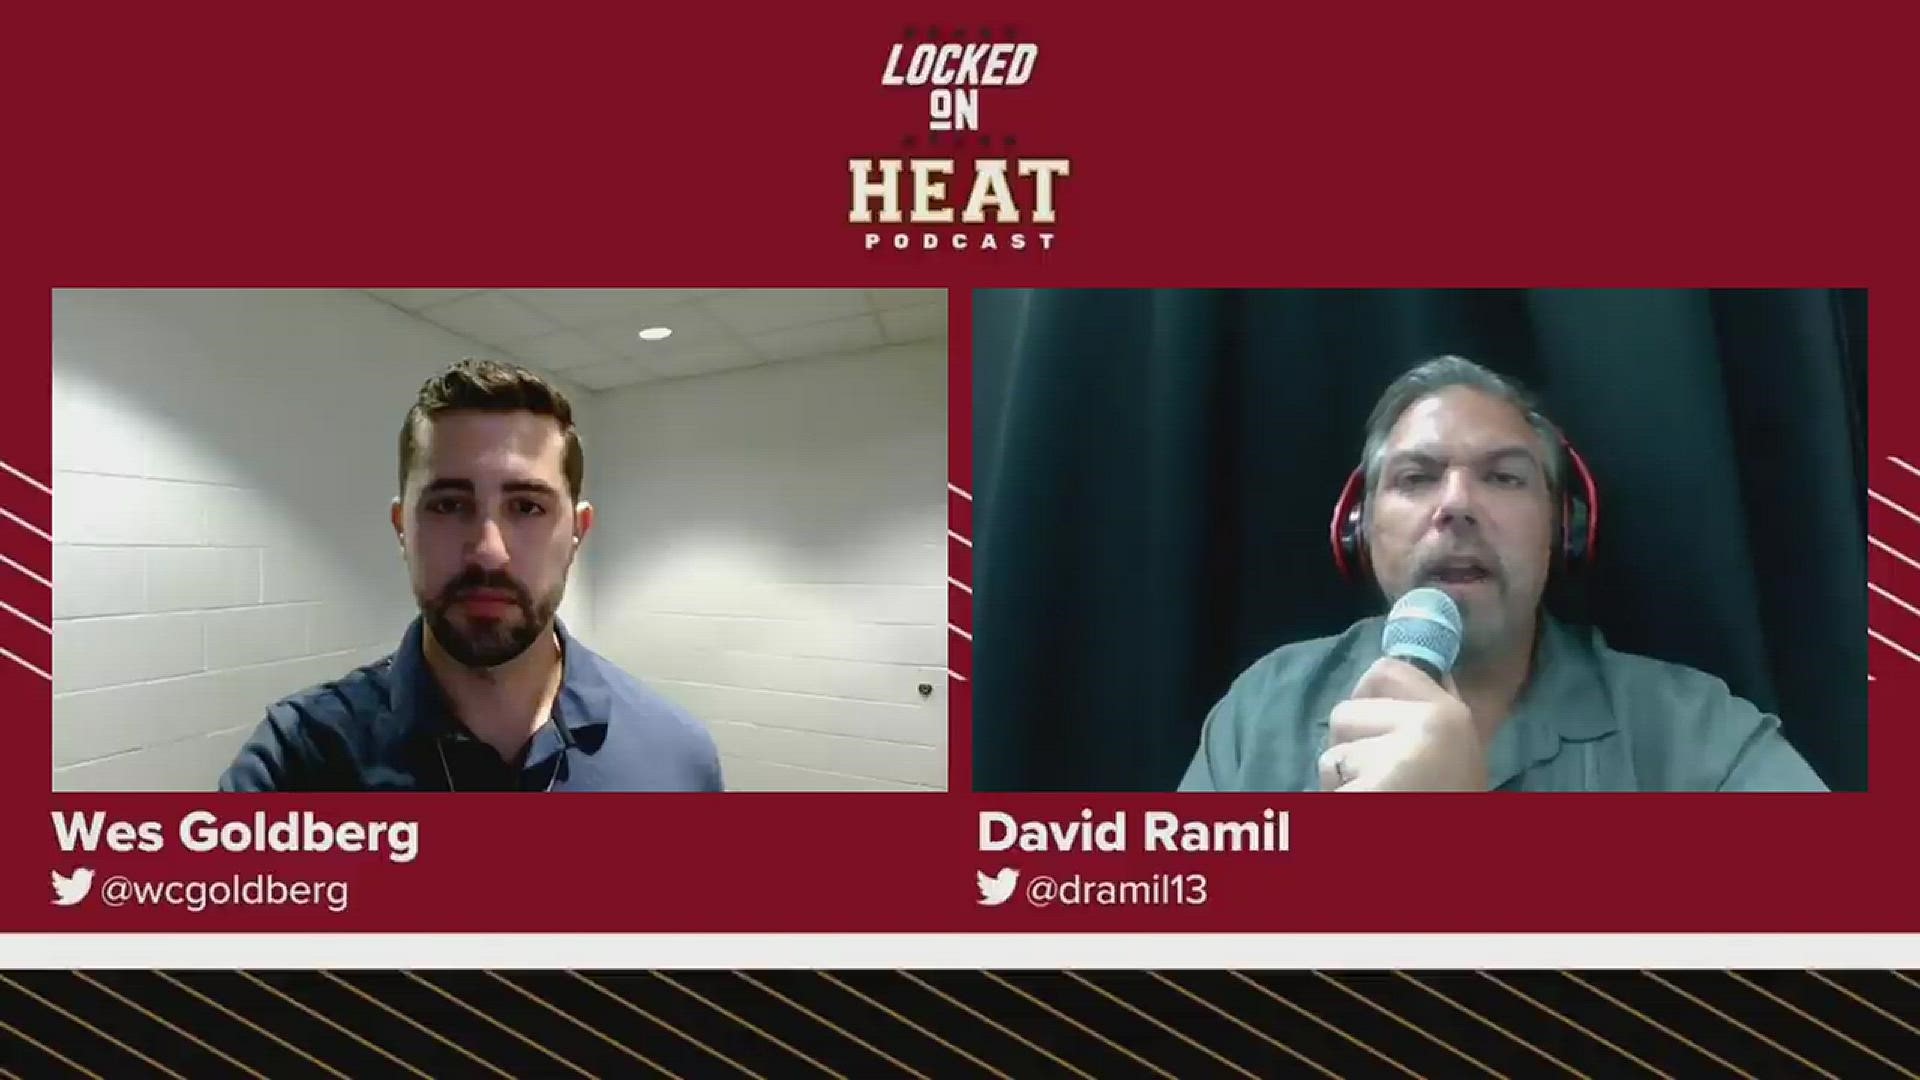 On the Locked On Heat podcast, hosts Wes Goldberg and David Ramil described what they saw, how players reacted postgame and what it means for the Heat going forward.